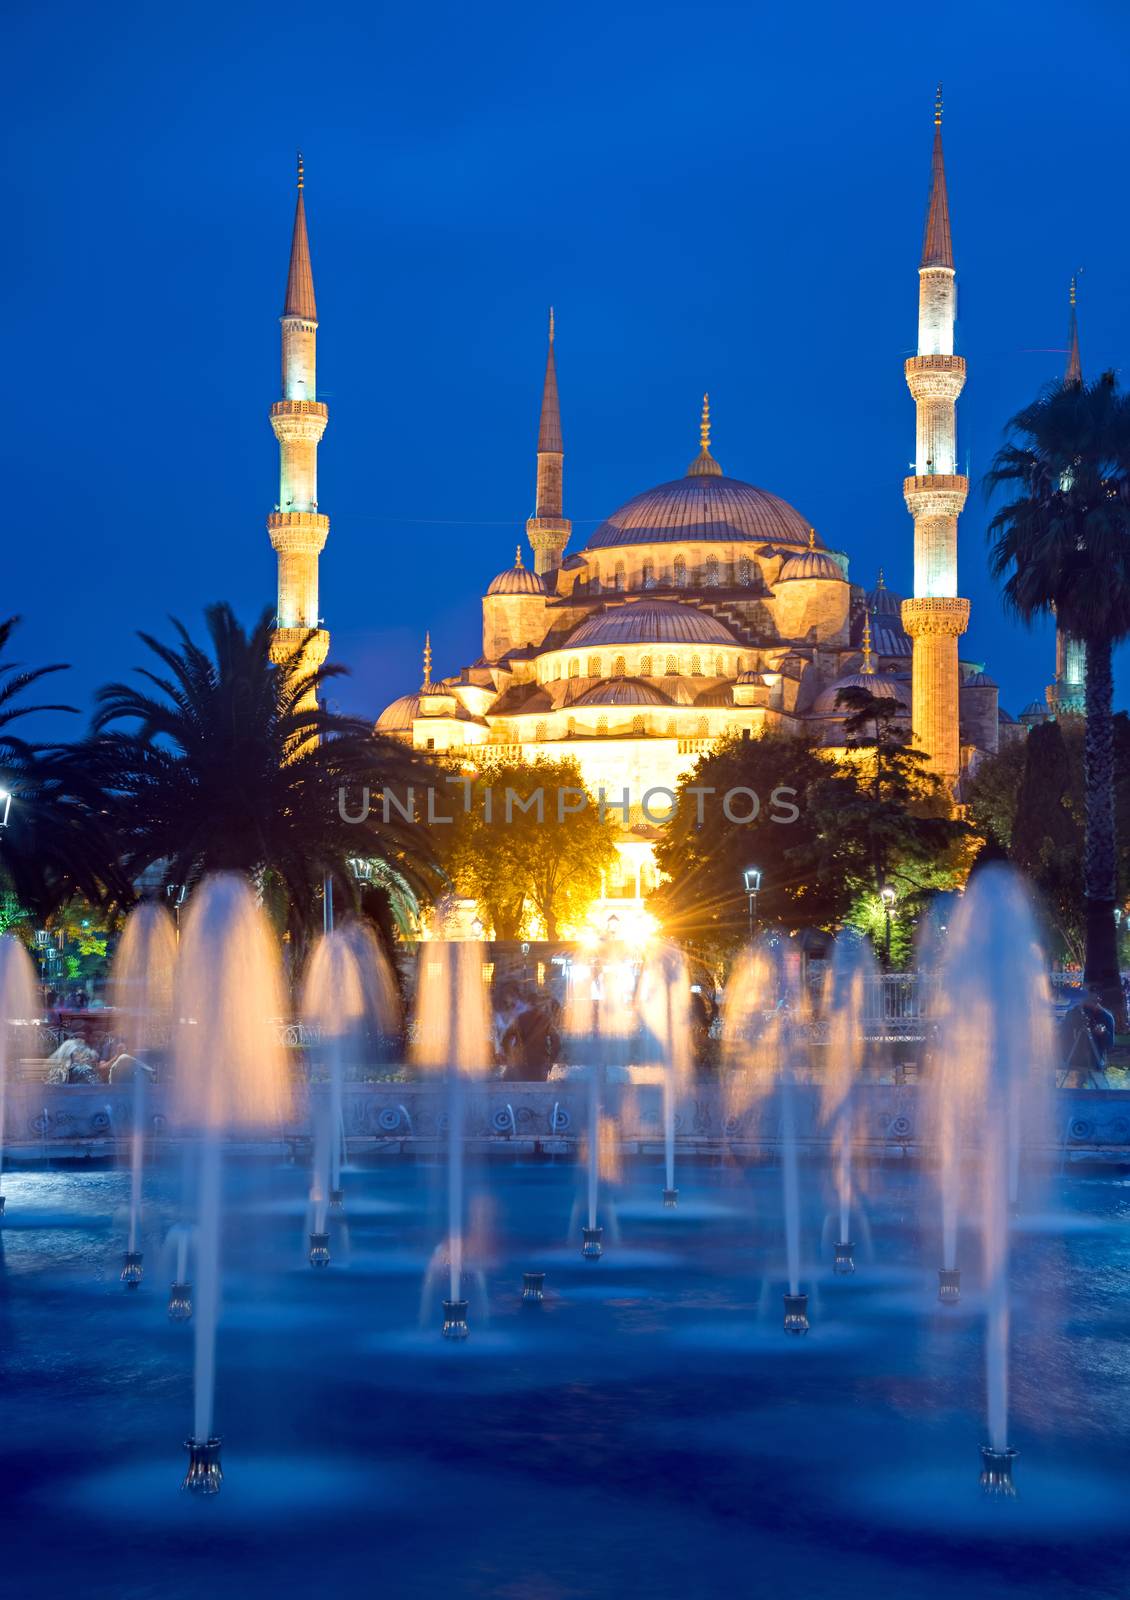 The famous Blue Mosque in Istanbul at dawn